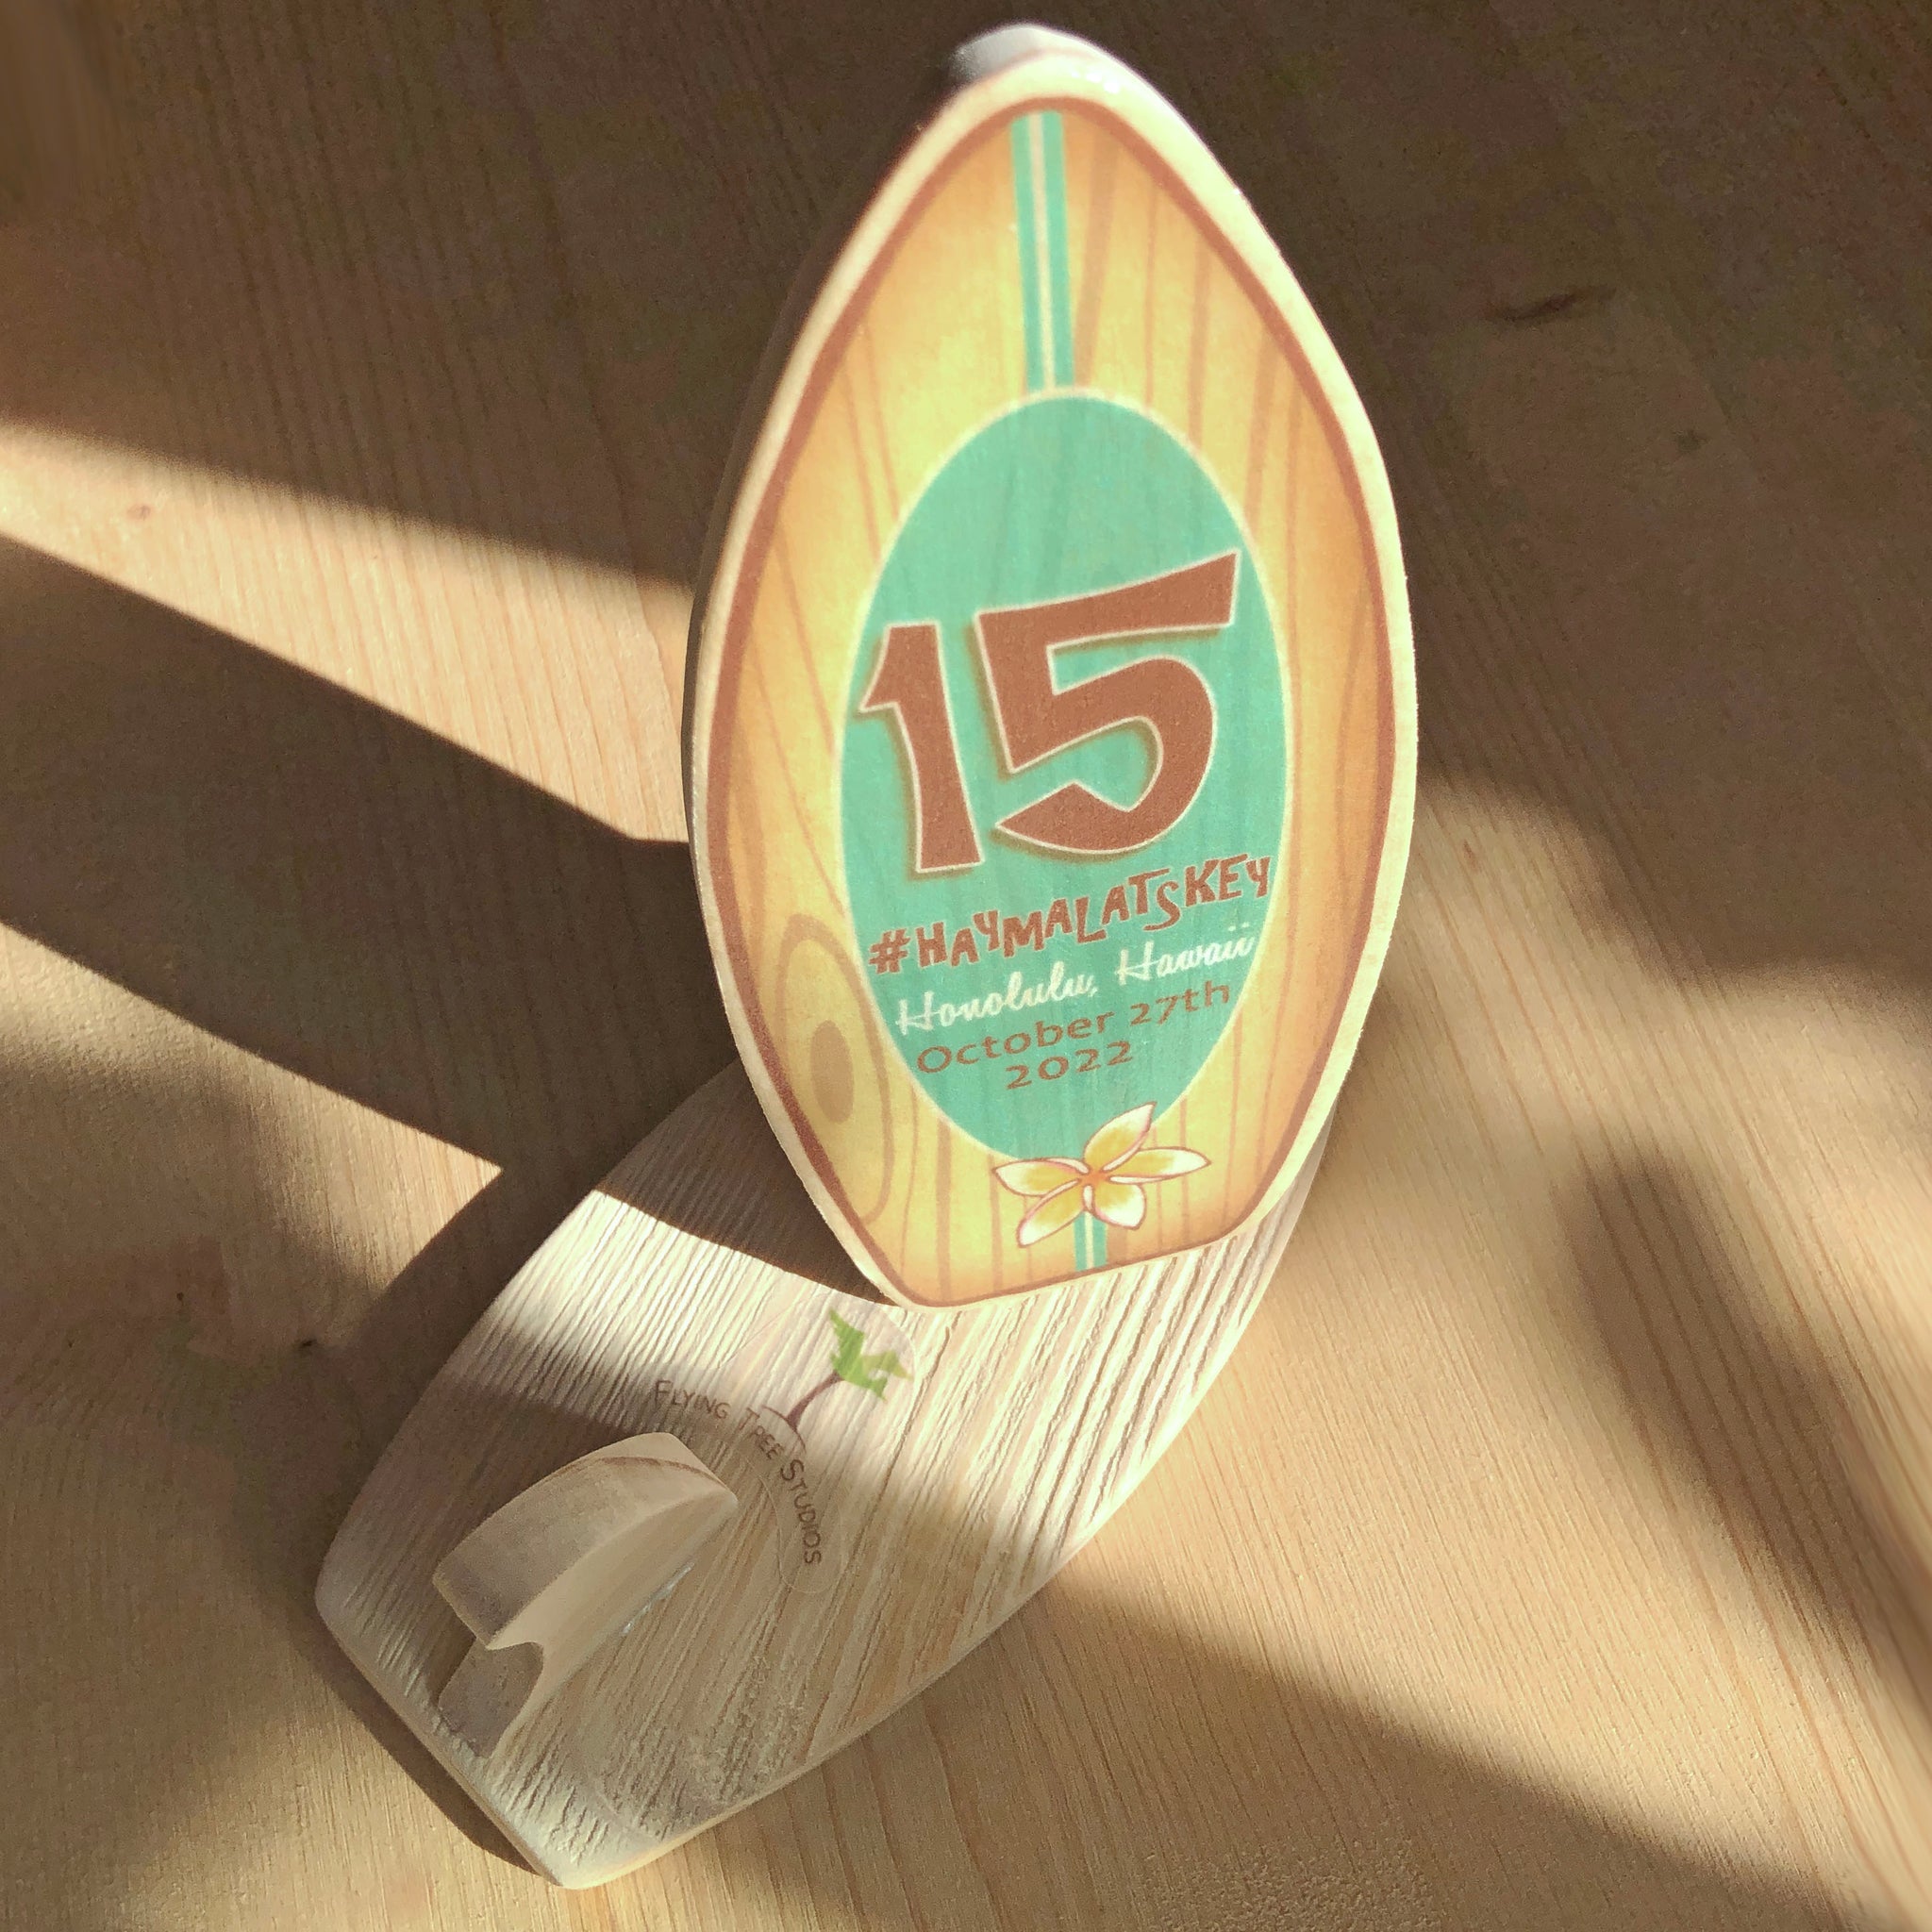 Mini Surfboard Table Number Signs Personalized for Wedding, Graduation, or any Special Event